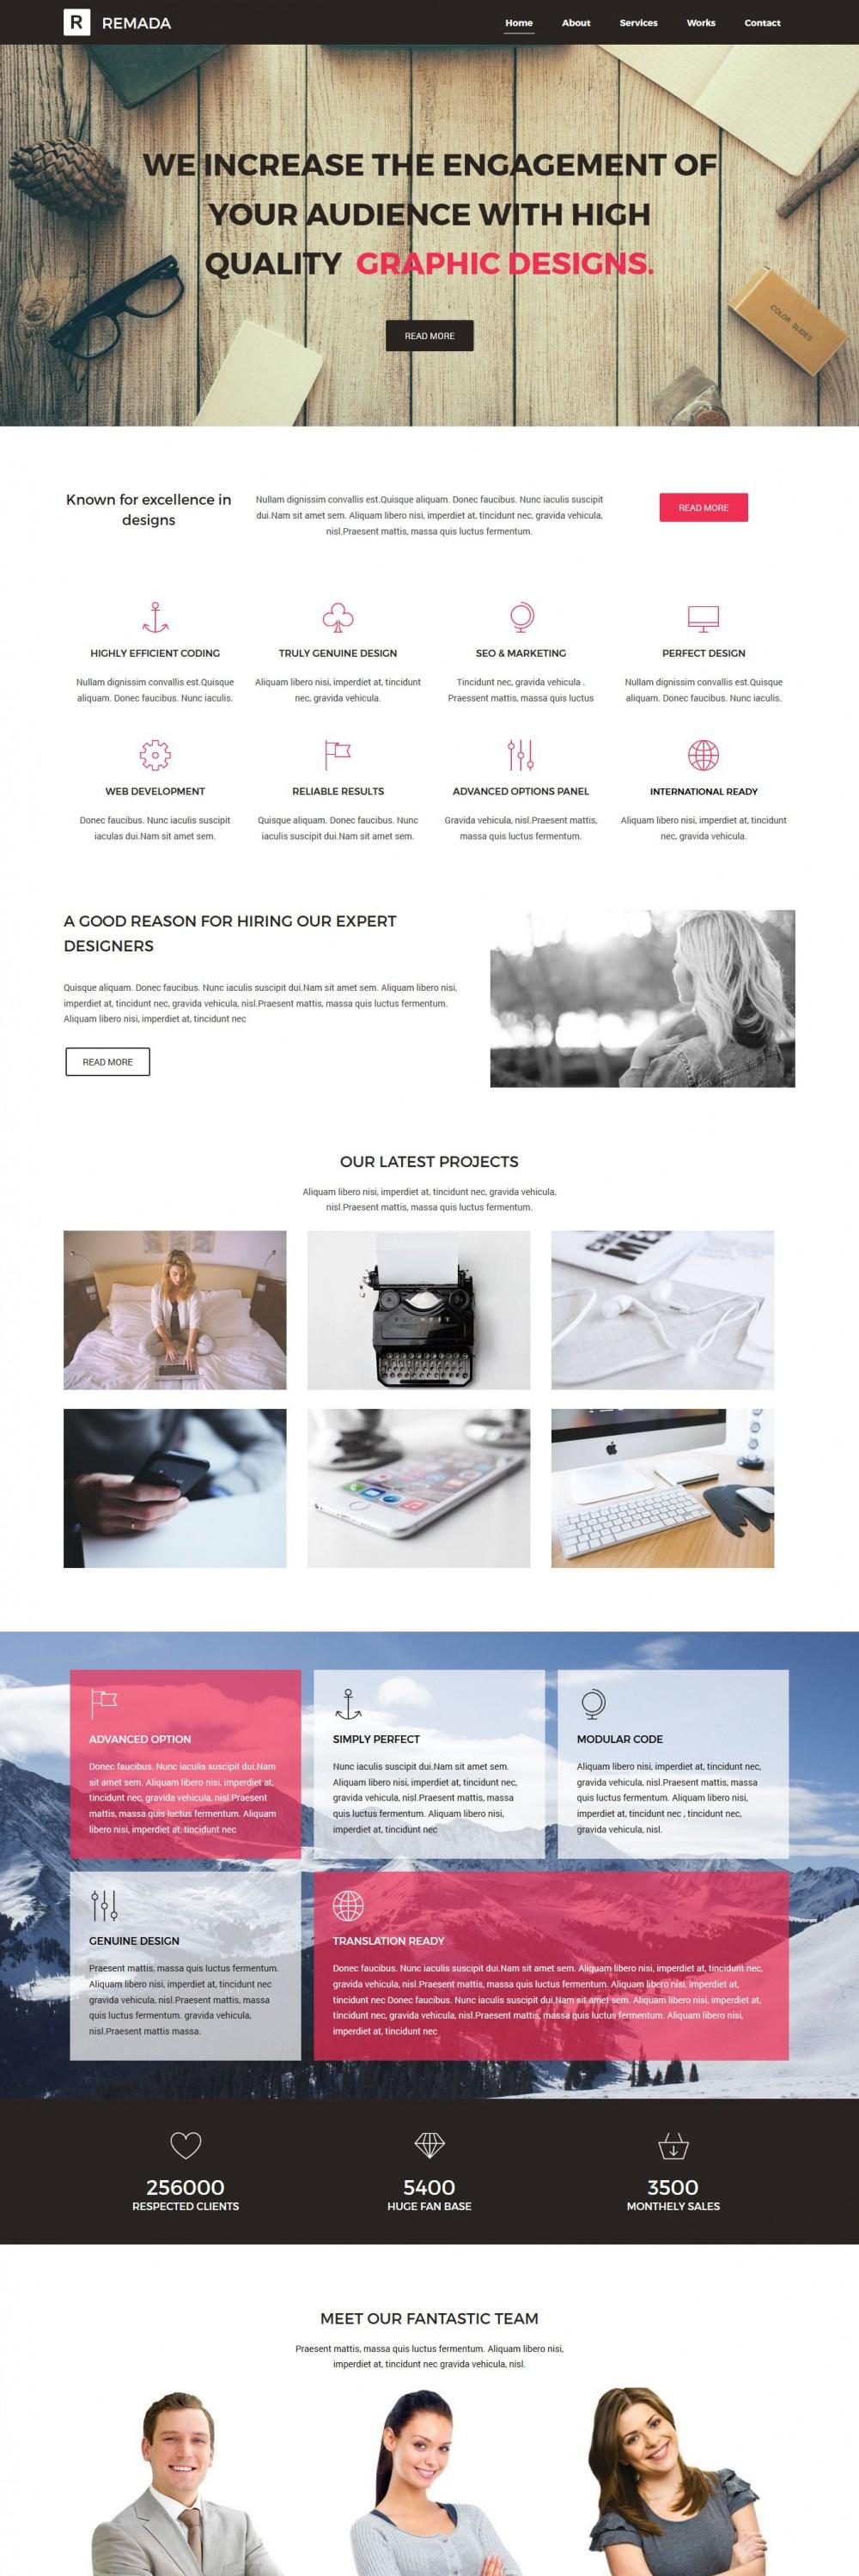 Remada Graphic And Web Design Agency Drupal Theme